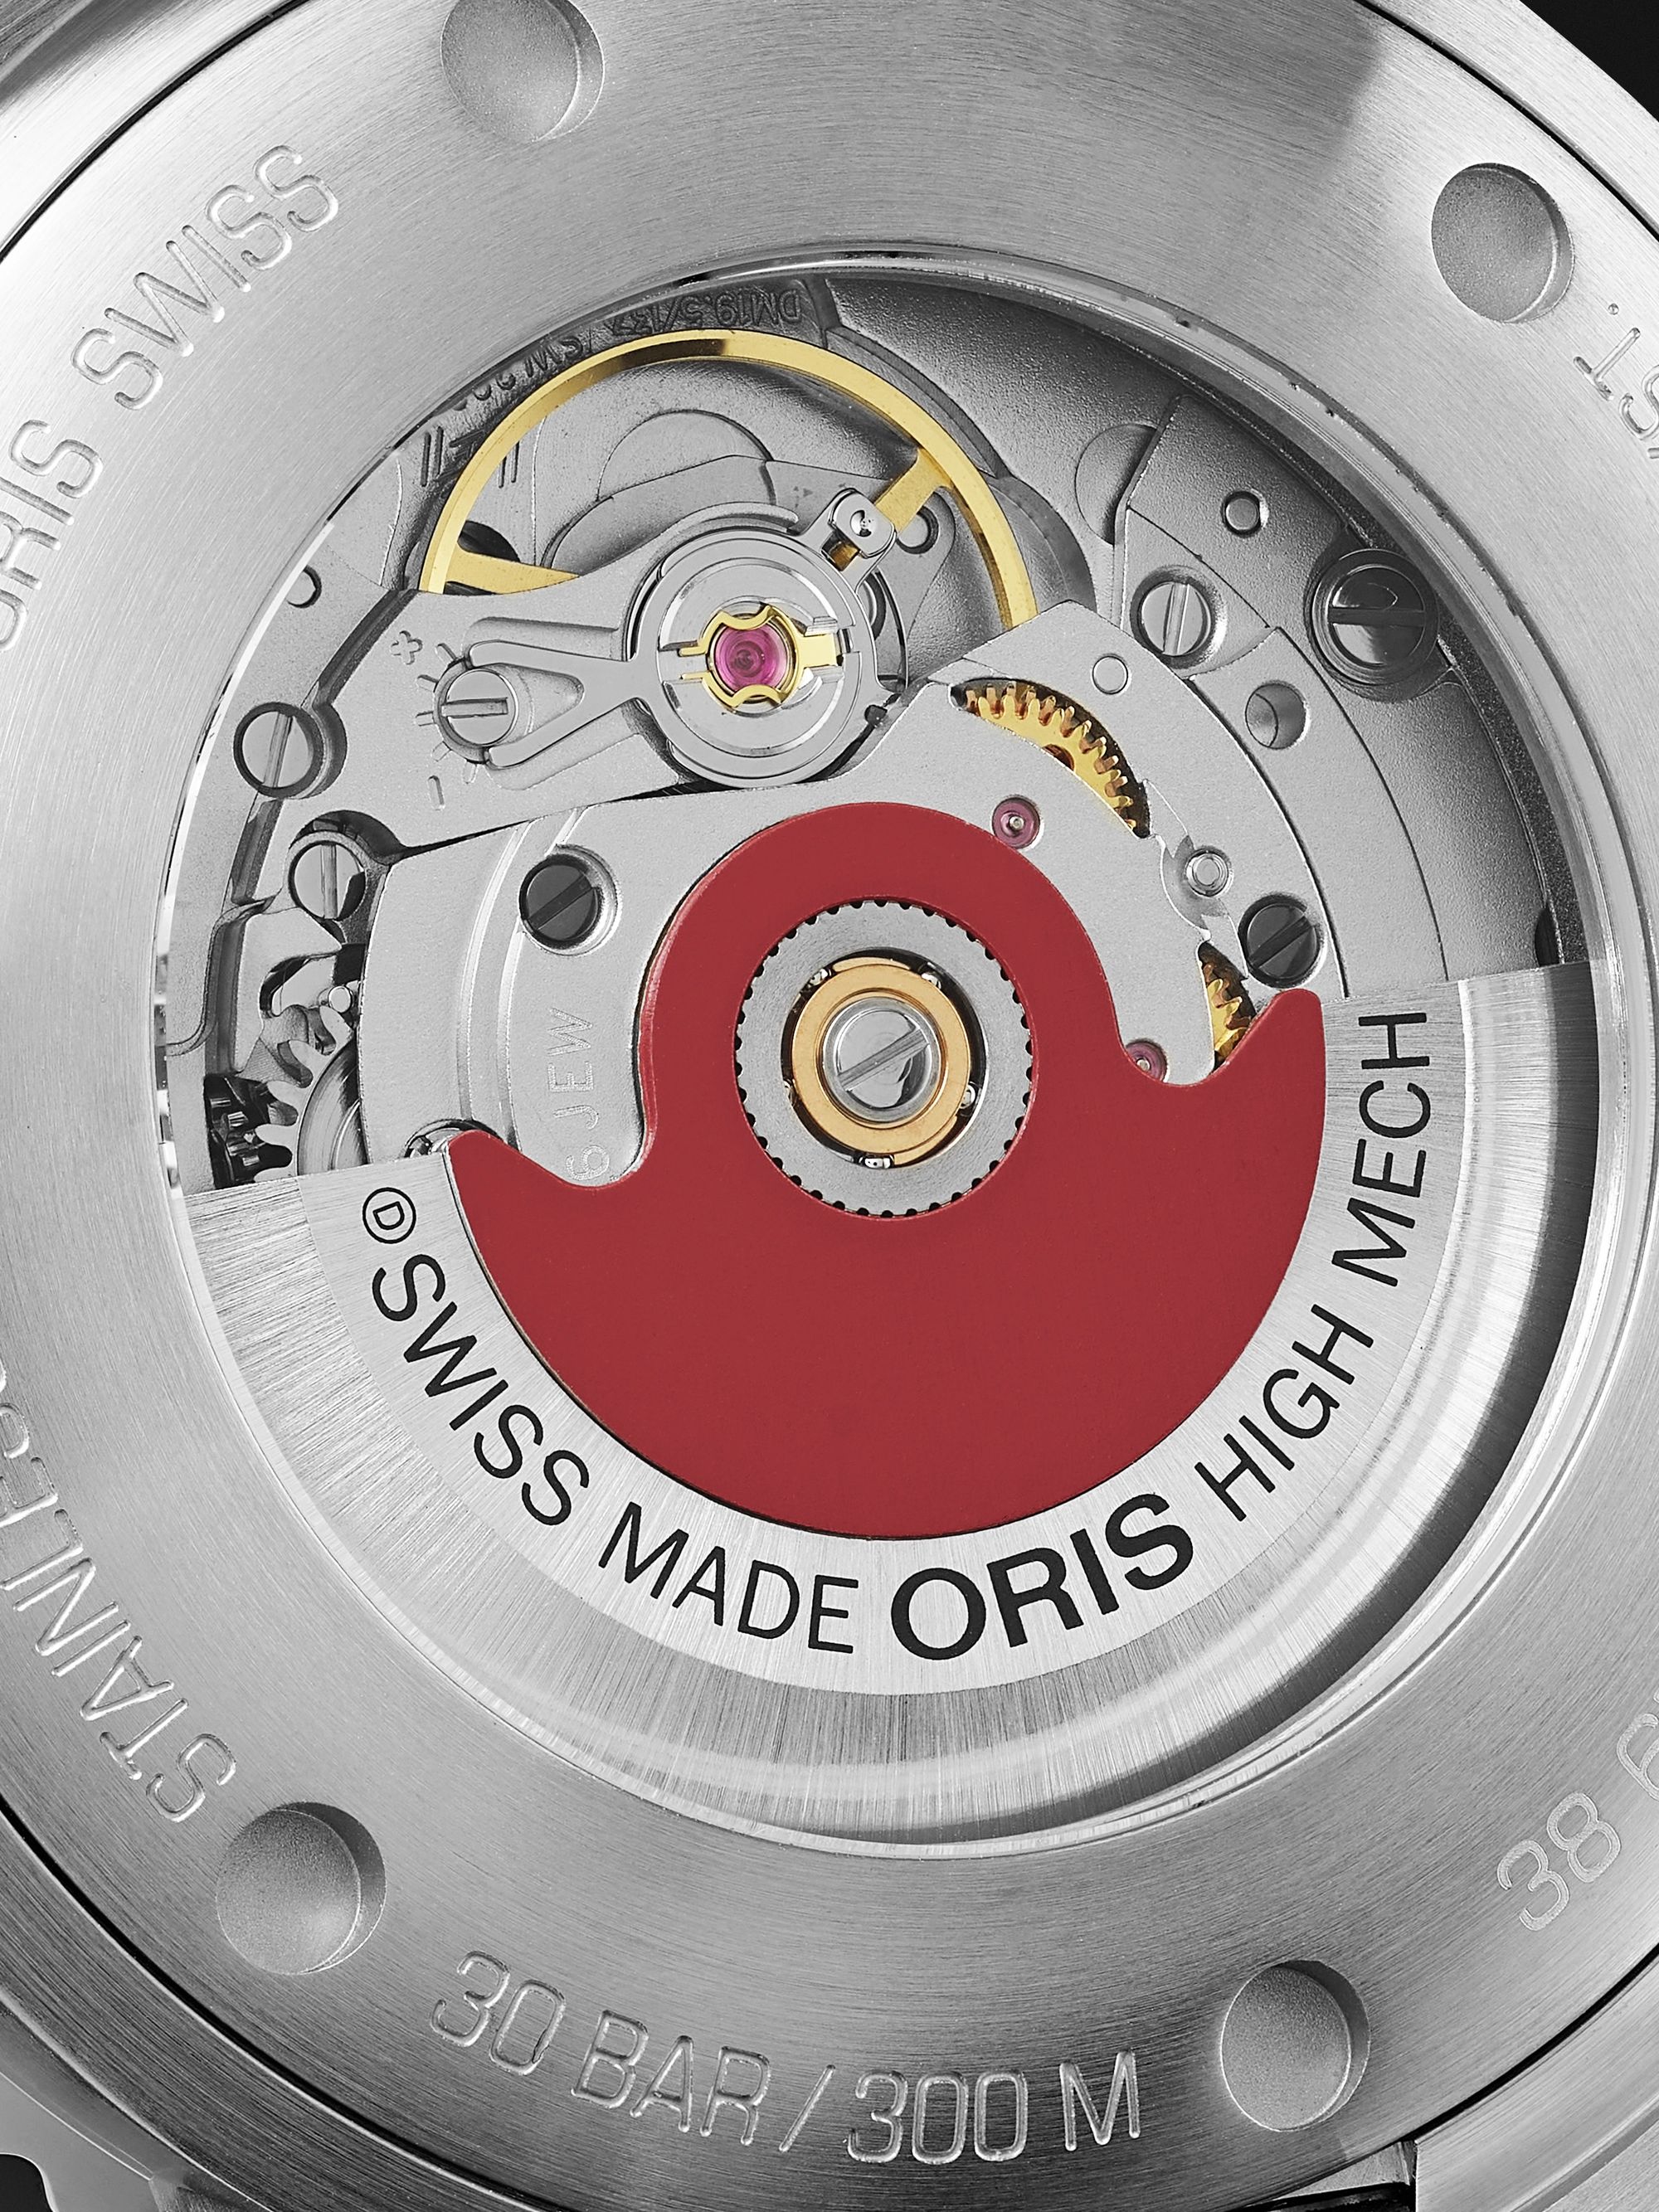 ORIS Aquis Date Automatic 41.5mm Stainless Steel and Rubber Watch, Ref. No. 01 733 7766 4135-07 4 22 64FC